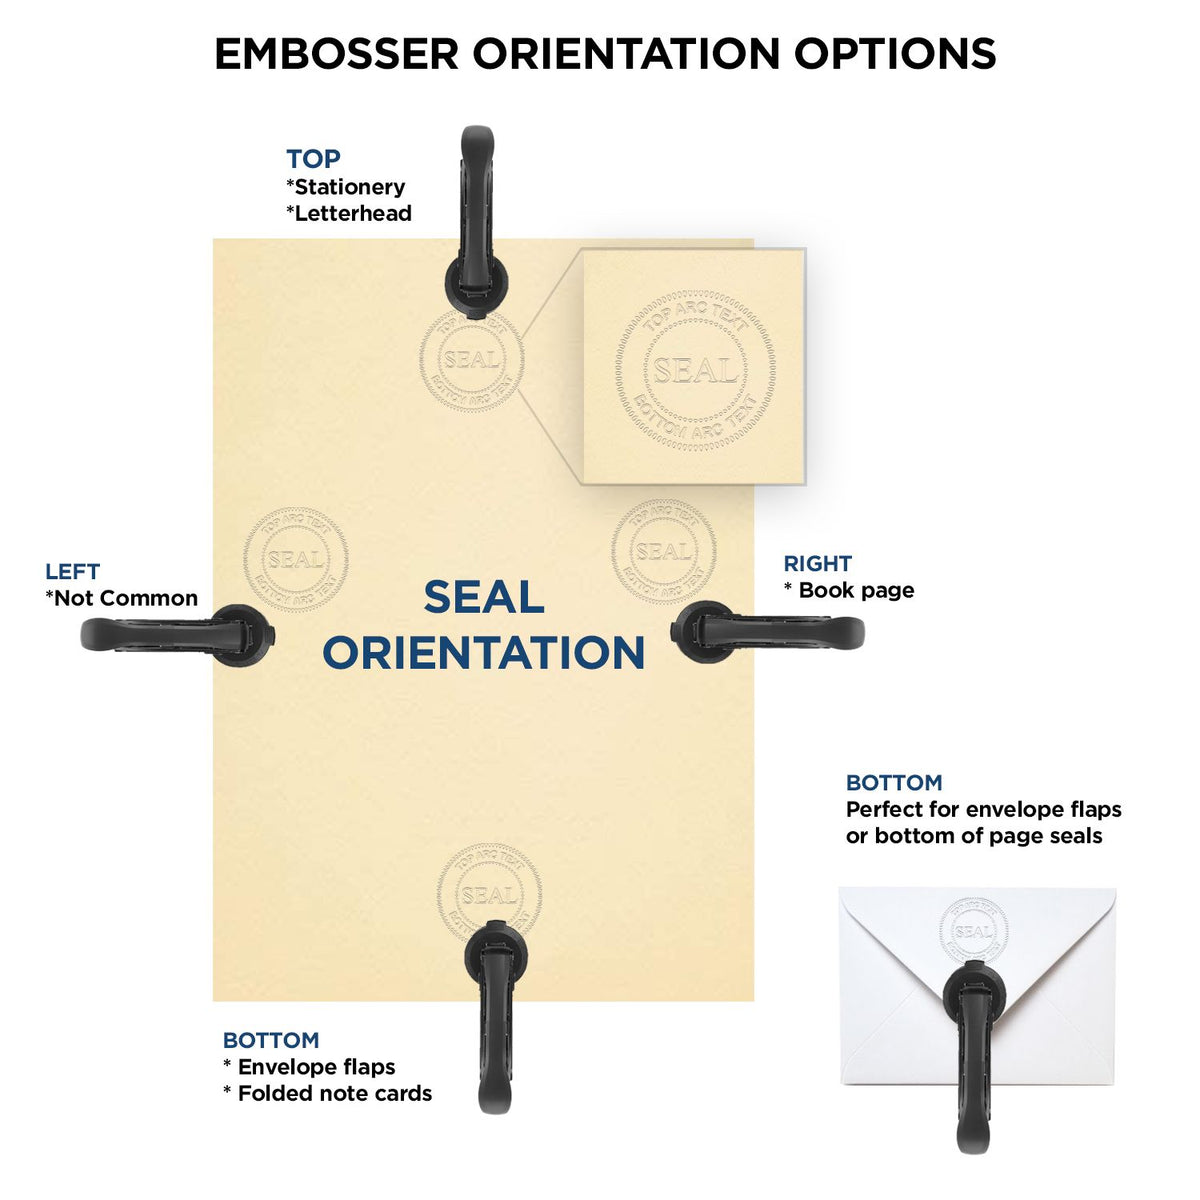 An infographic for the Handheld Arizona Architect Seal Embosser showing embosser orientation, this is showing examples of a top, bottom, right and left insert.